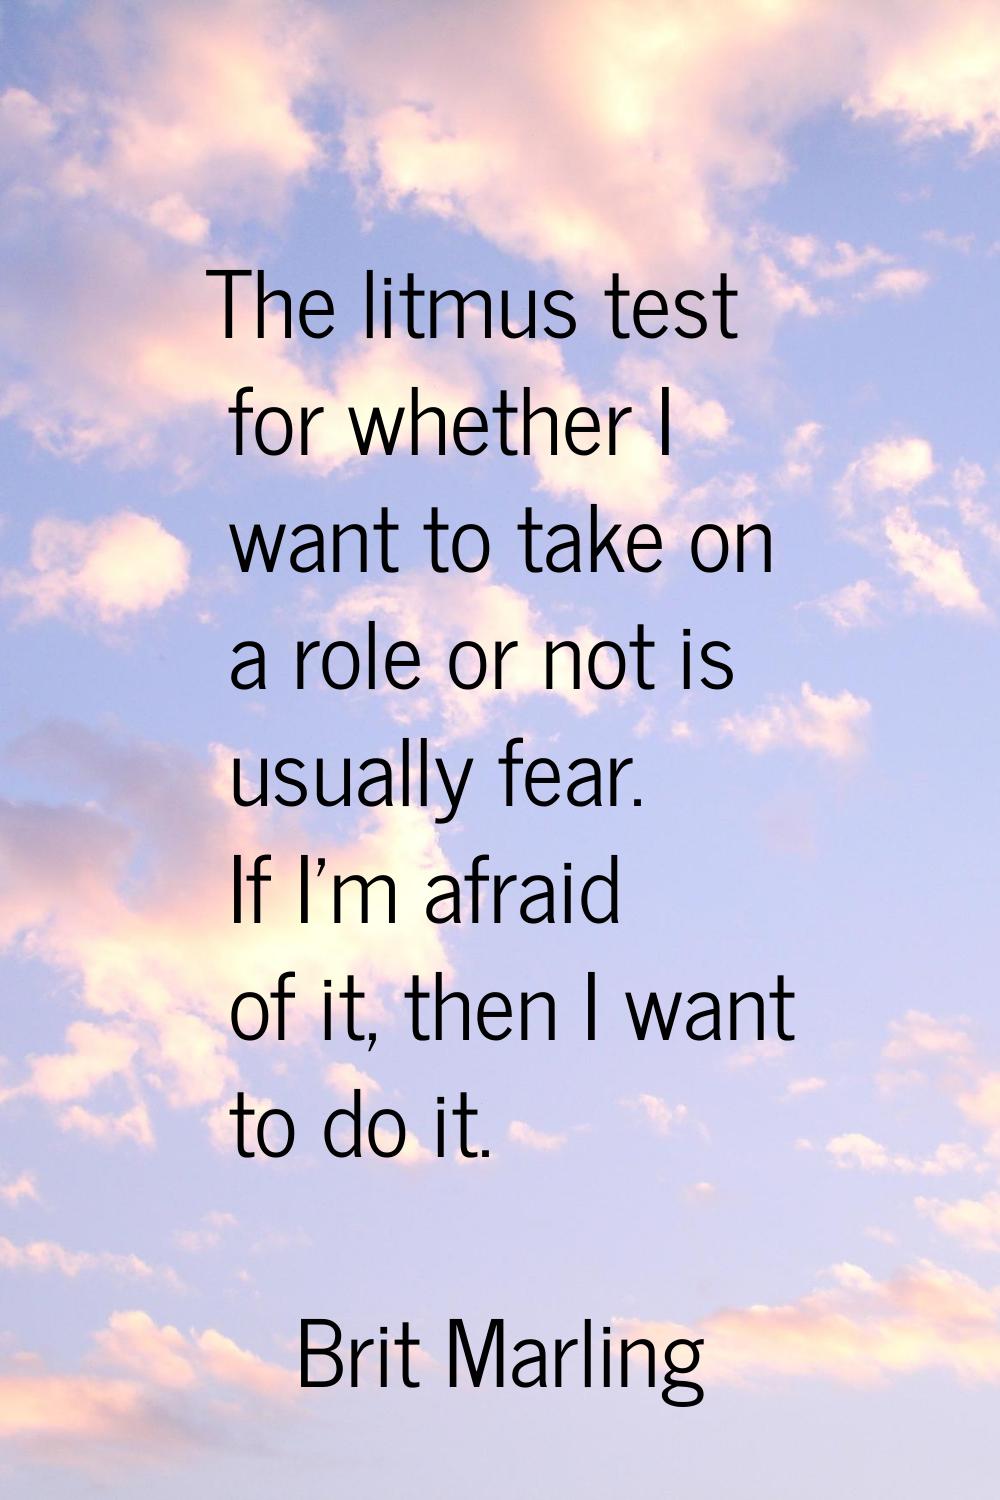 The litmus test for whether I want to take on a role or not is usually fear. If I'm afraid of it, t